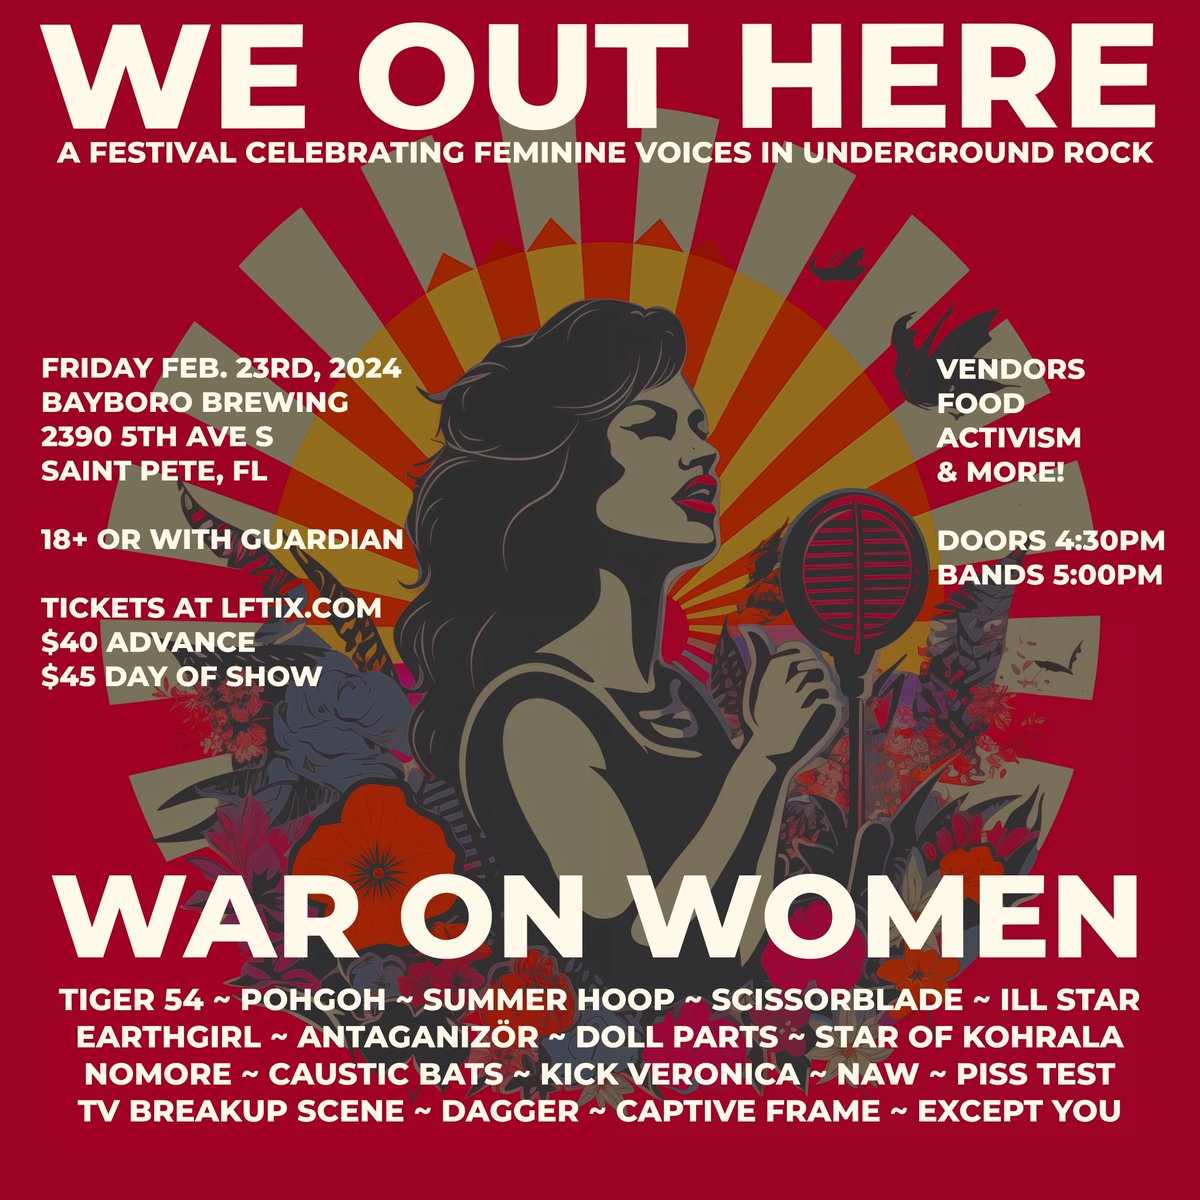 FESTIVAL ANNOUJNCEMENT! We're very proud to be a part of this one (brought to you by Leadfoot Promotions). TIX: leadfootpromotions.limitedrun.com/Shows/17754
Killer lineup! #waronwomen #tiger54 #dollparts #scissorblade & much more! @spartanrecords